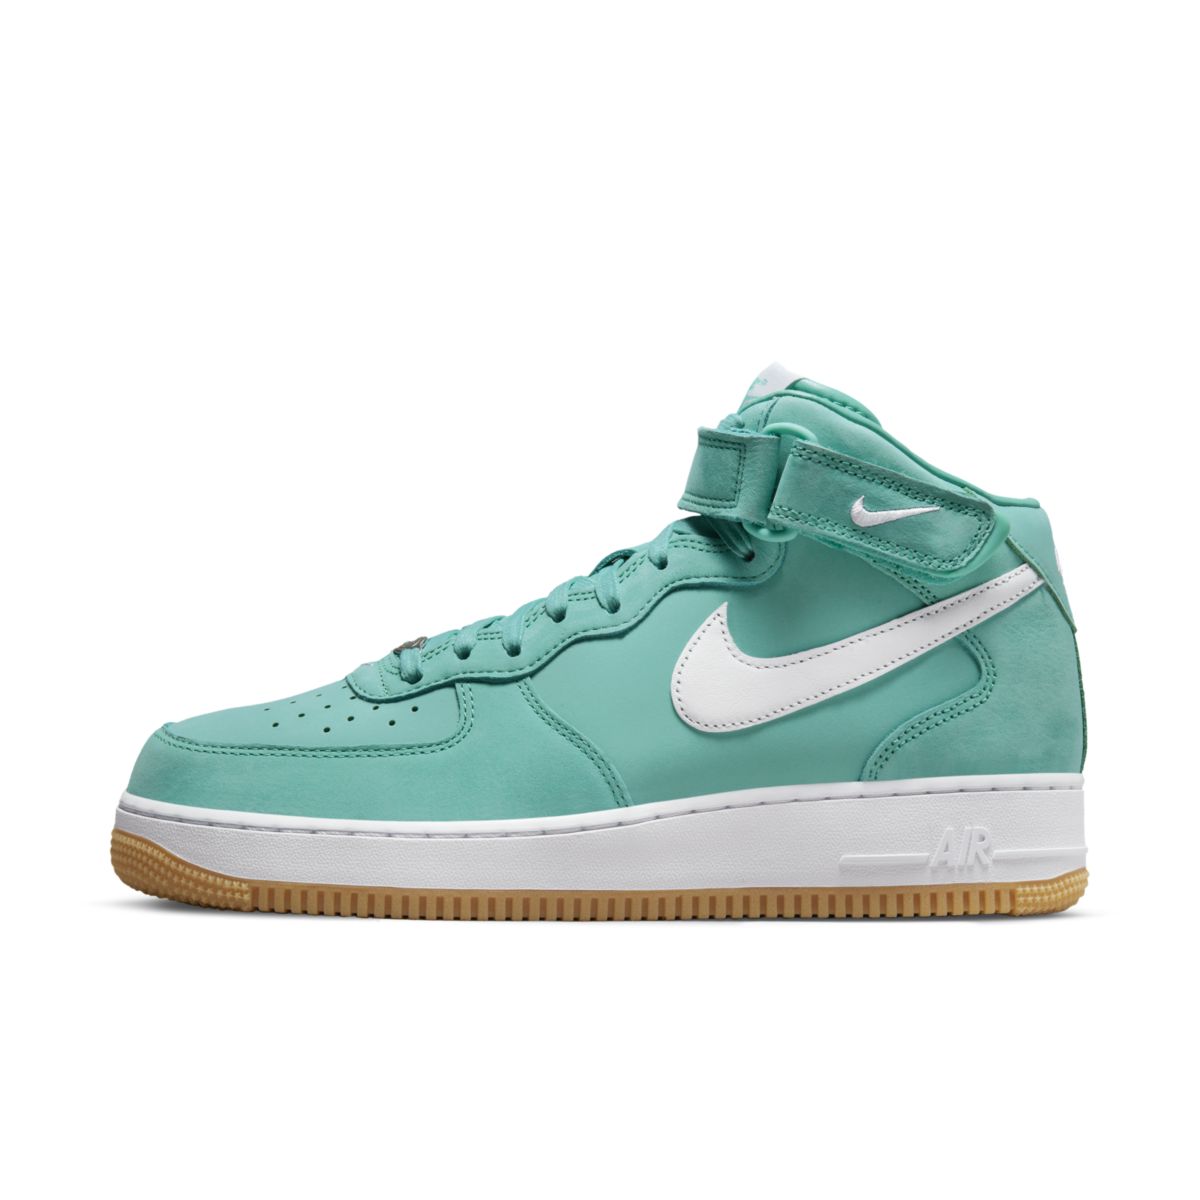 Nike Air Force 1 Mid Turquoise DV2219-300 2